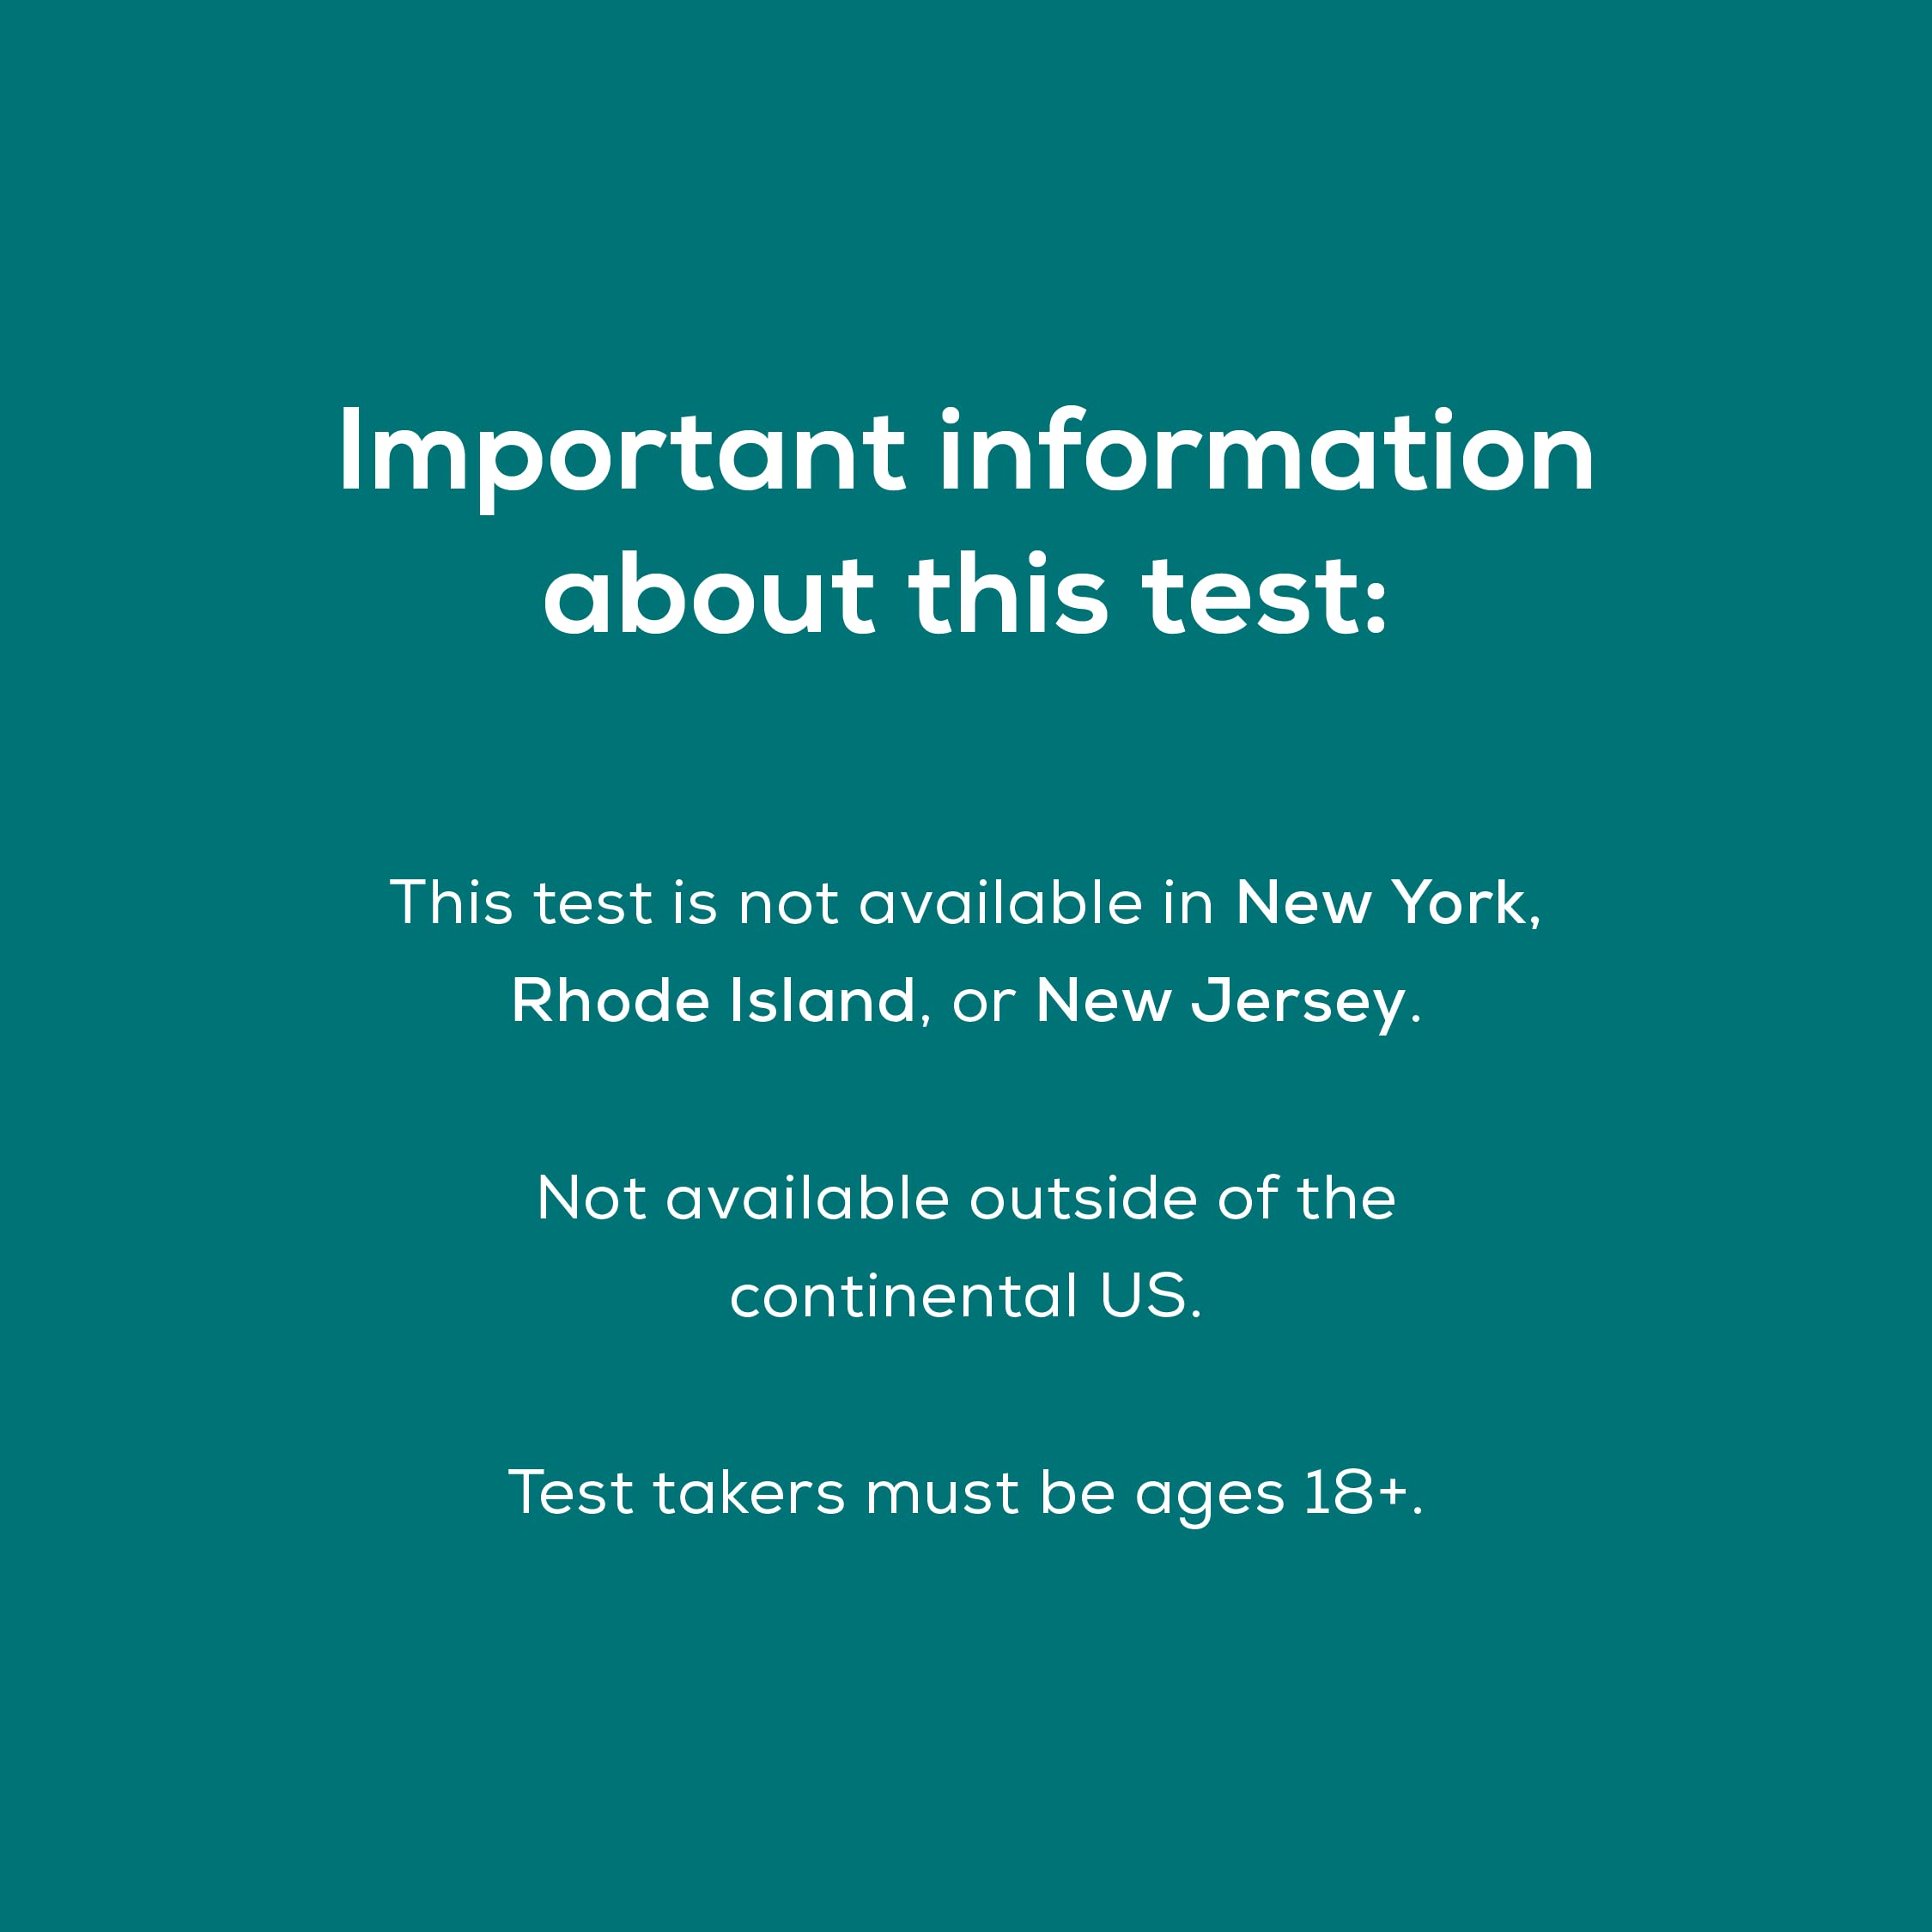 Everlywell Food Sensitivity Comprehensive Test - Learn How Your Body Responds to 204 Different Foods - at-Home Collection Kit - CLIA-Certified Labs - Ages 18+